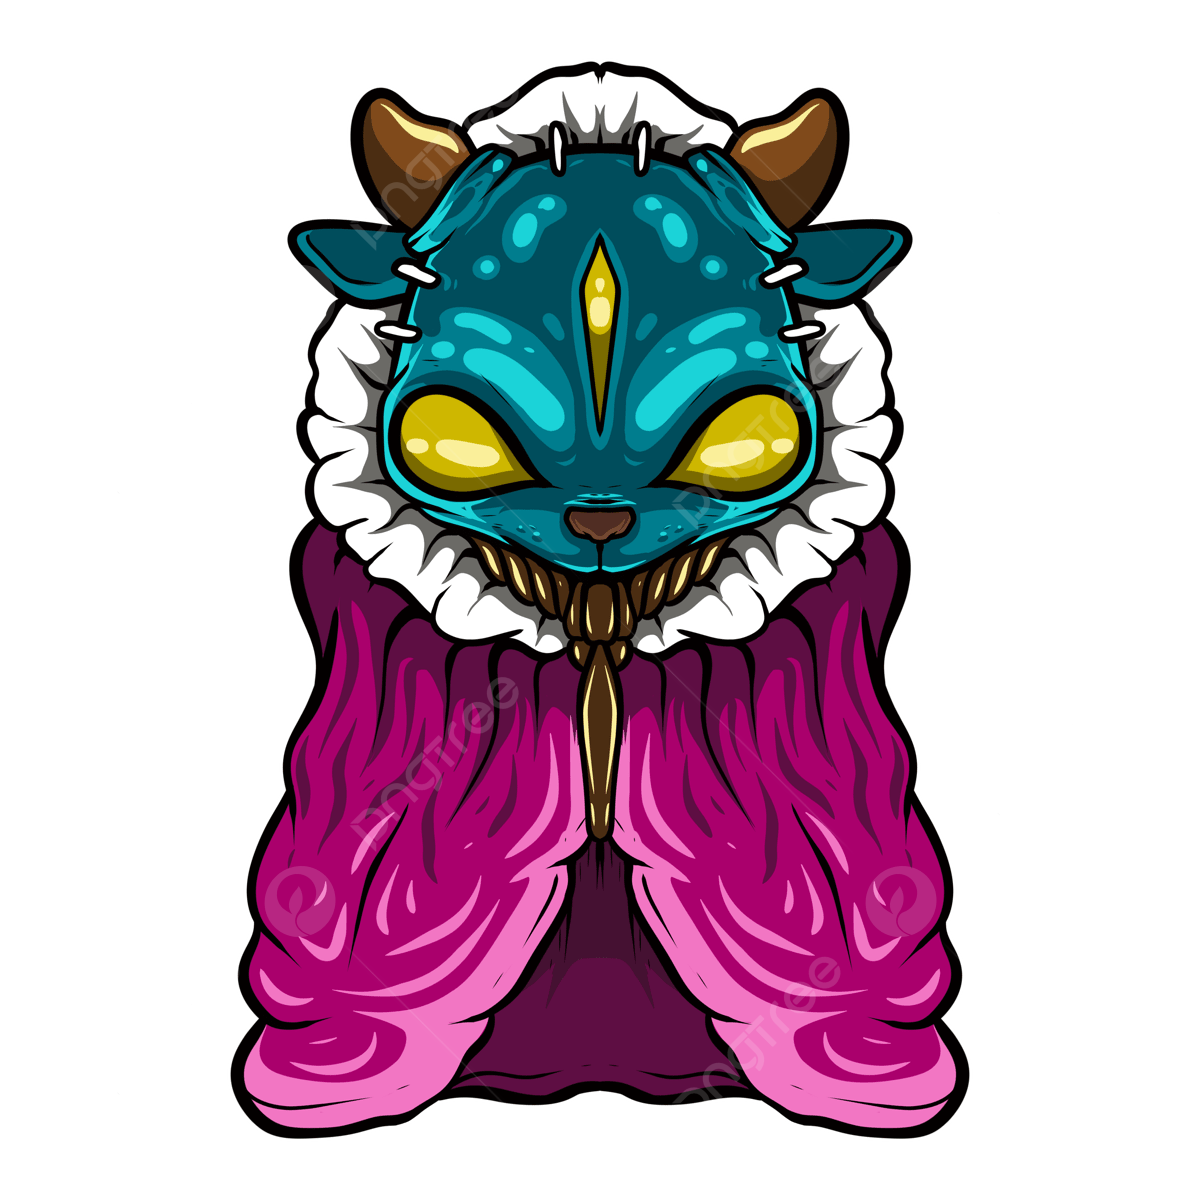 Lords png image lord monster cartoon artwork cartoon illustration png image for free download